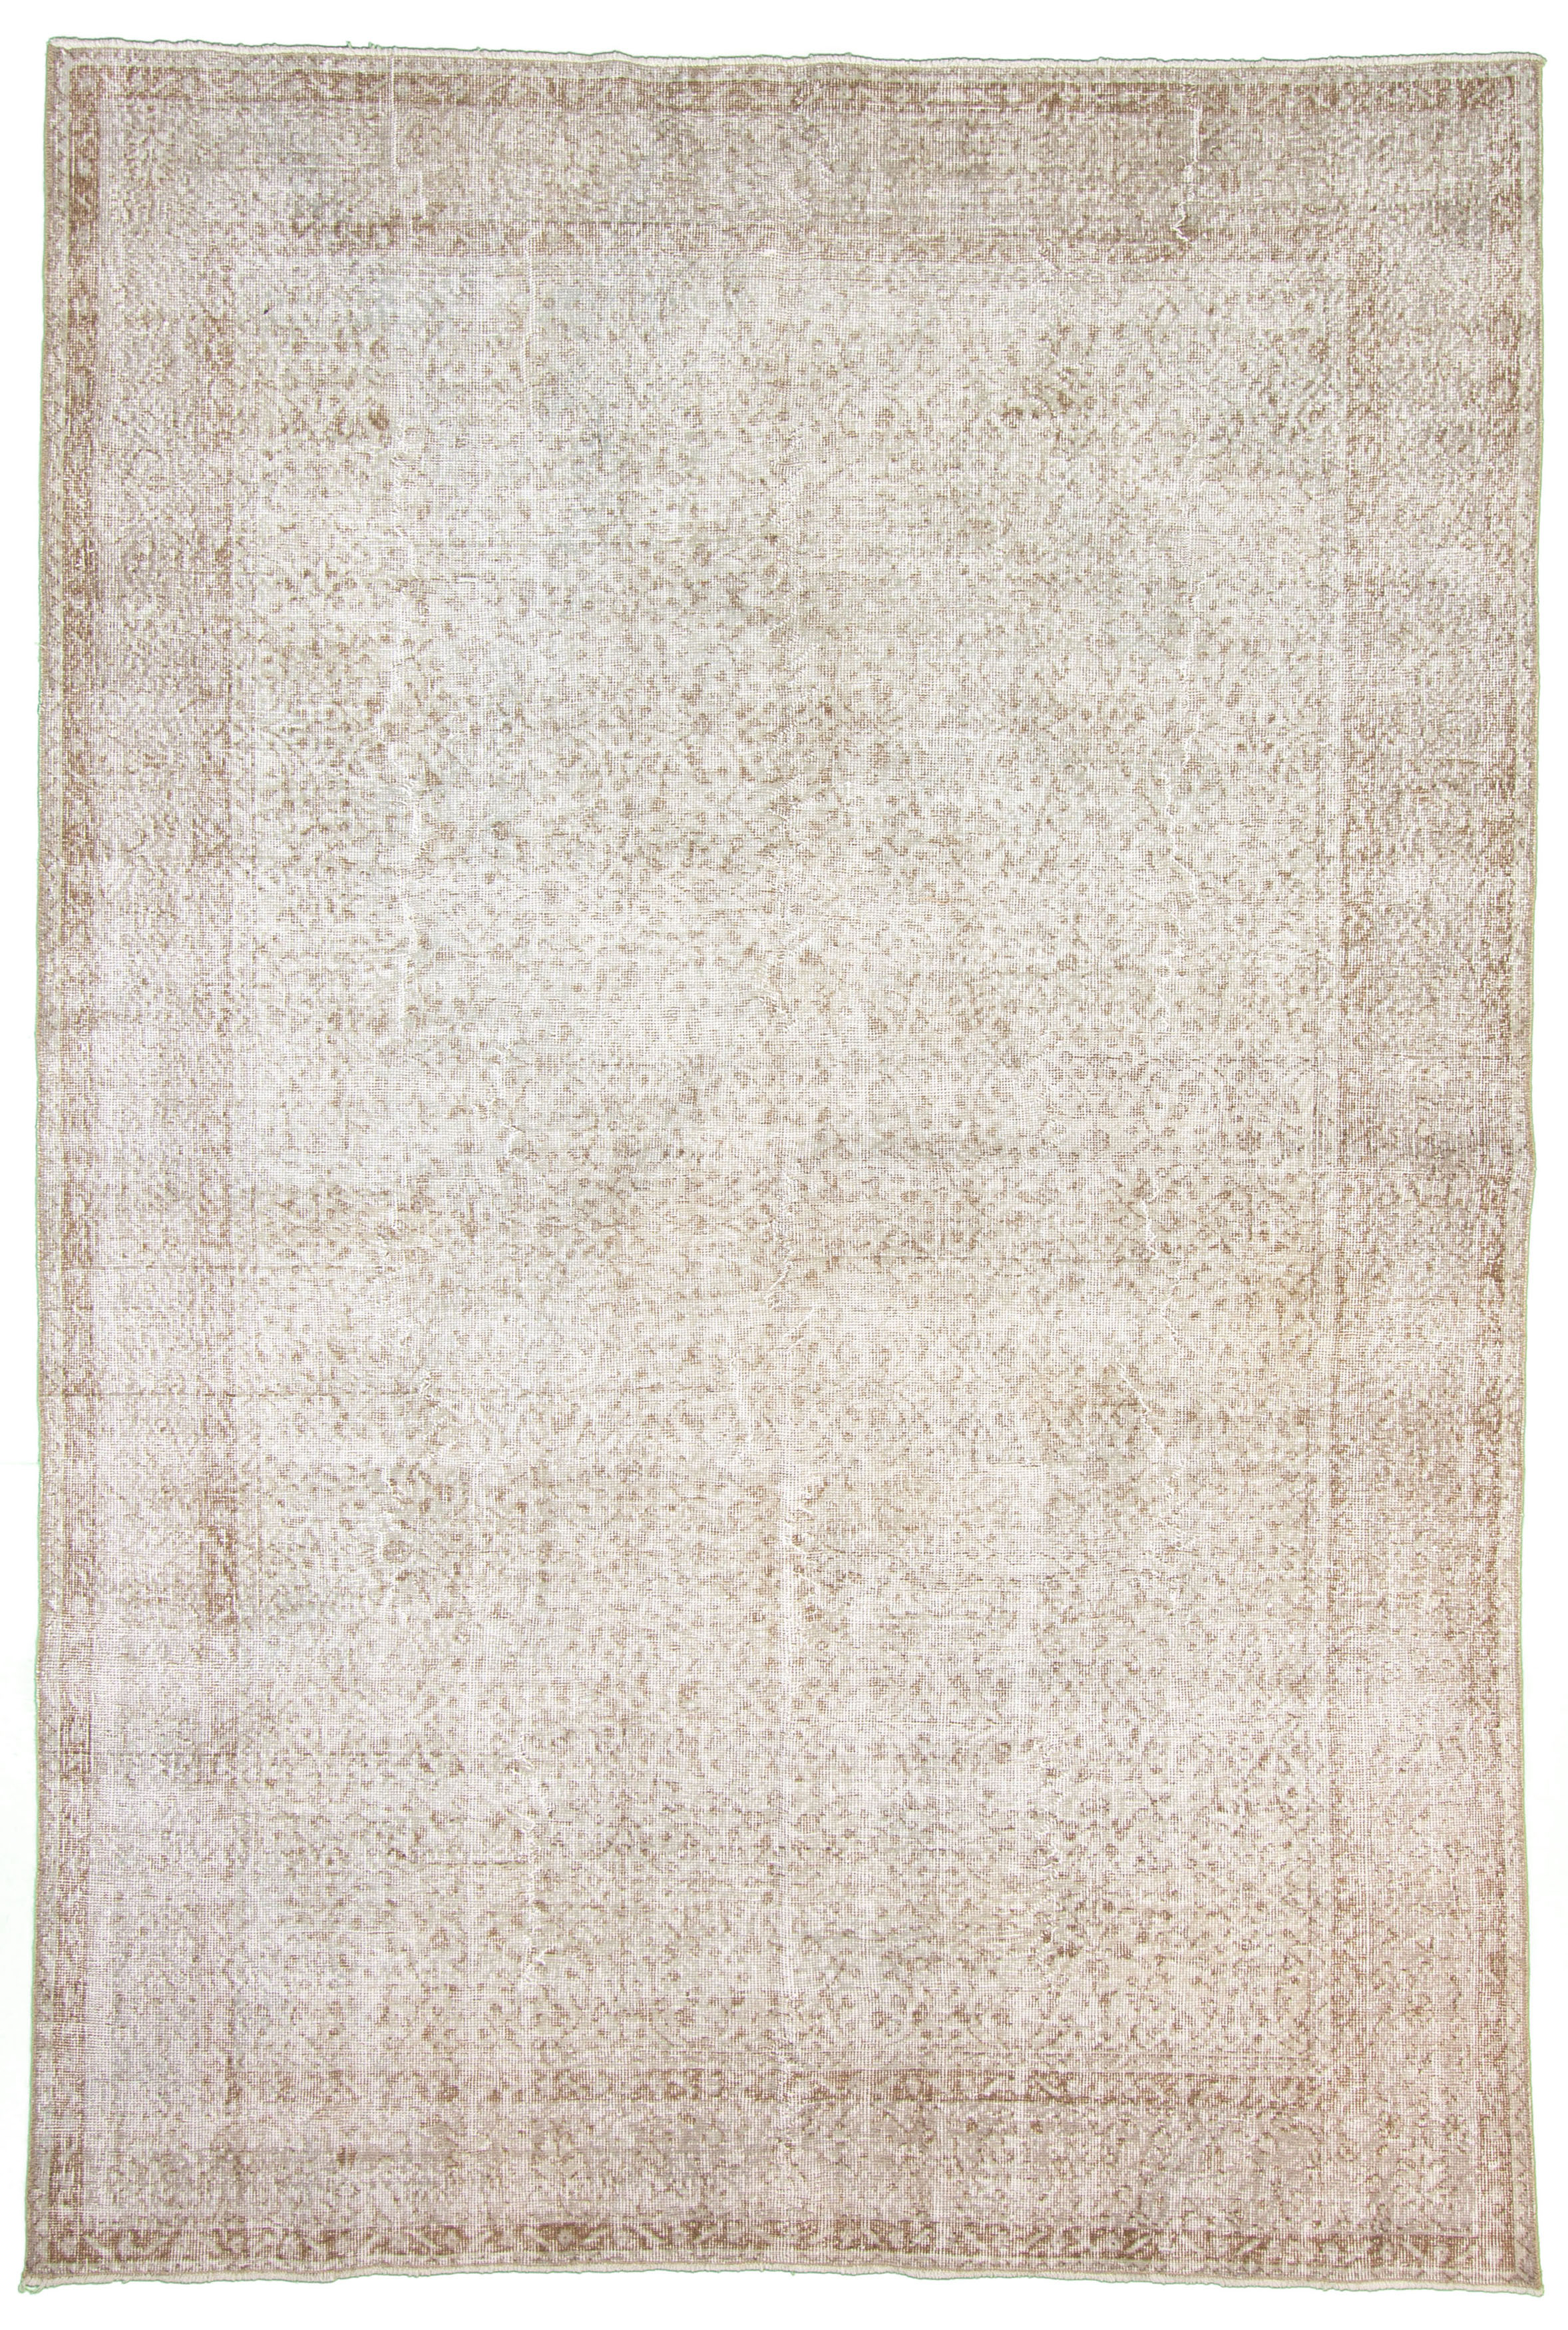 Hand-knotted Antalya Vintage   Rug 9'10" x 6'8" Size: 6'8" x 9'10"  